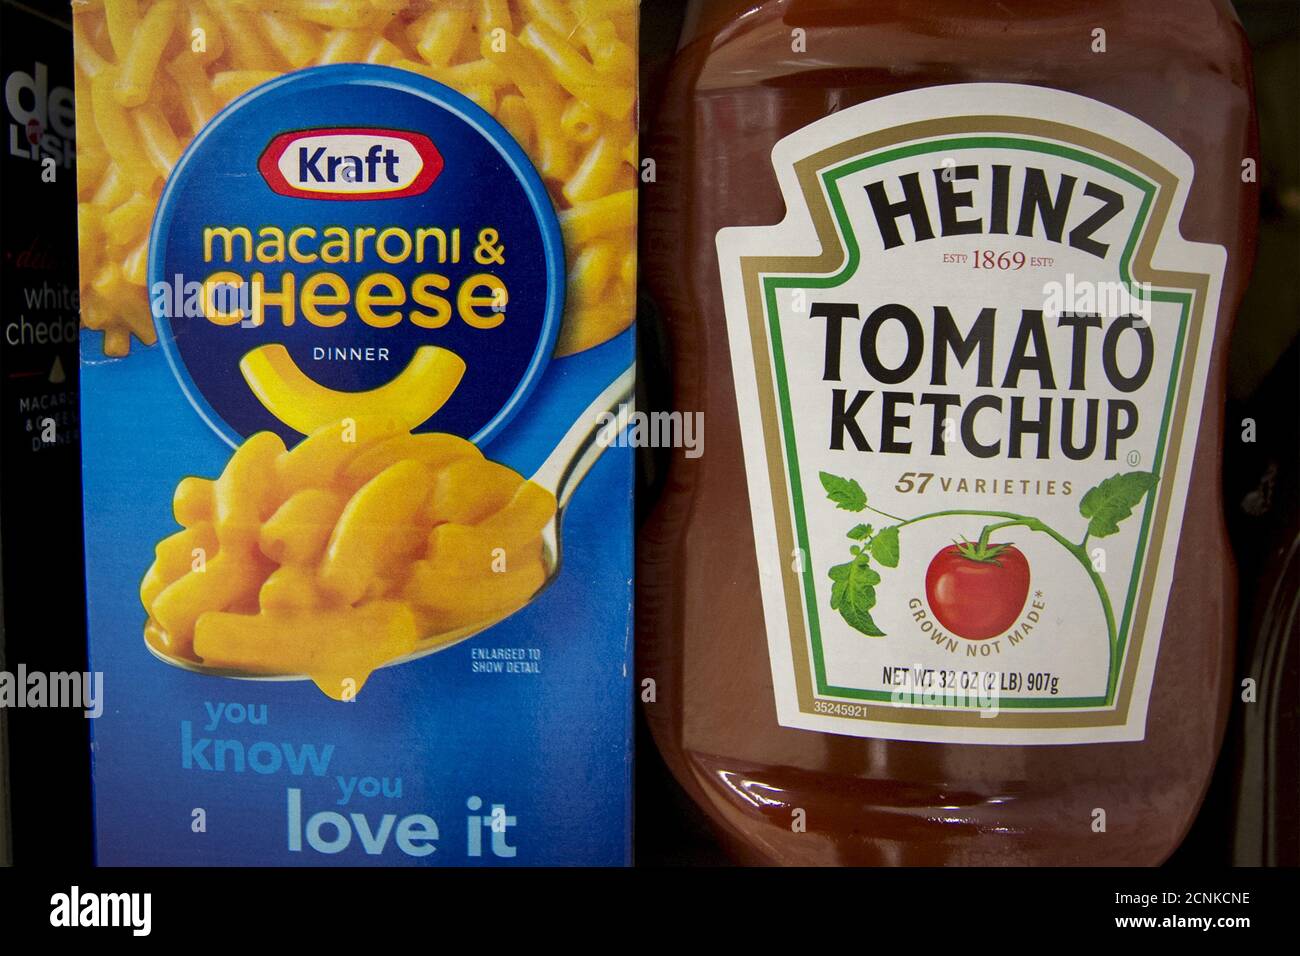 A box of Kraft macaroni and cheese and a Heinz Ketchup bottle are displayed together on a grocery store shelf in New York March 25, 2015. Kraft Foods Group Inc, the maker of Velveeta cheese and Oscar Mayer meats, will merge with ketchup maker H.J. Heinz Co, owned by 3G Capital and Berkshire Hathaway Inc, to form the world's fifth-largest food and beverage company. REUTERS/Brendan McDermid Stock Photo